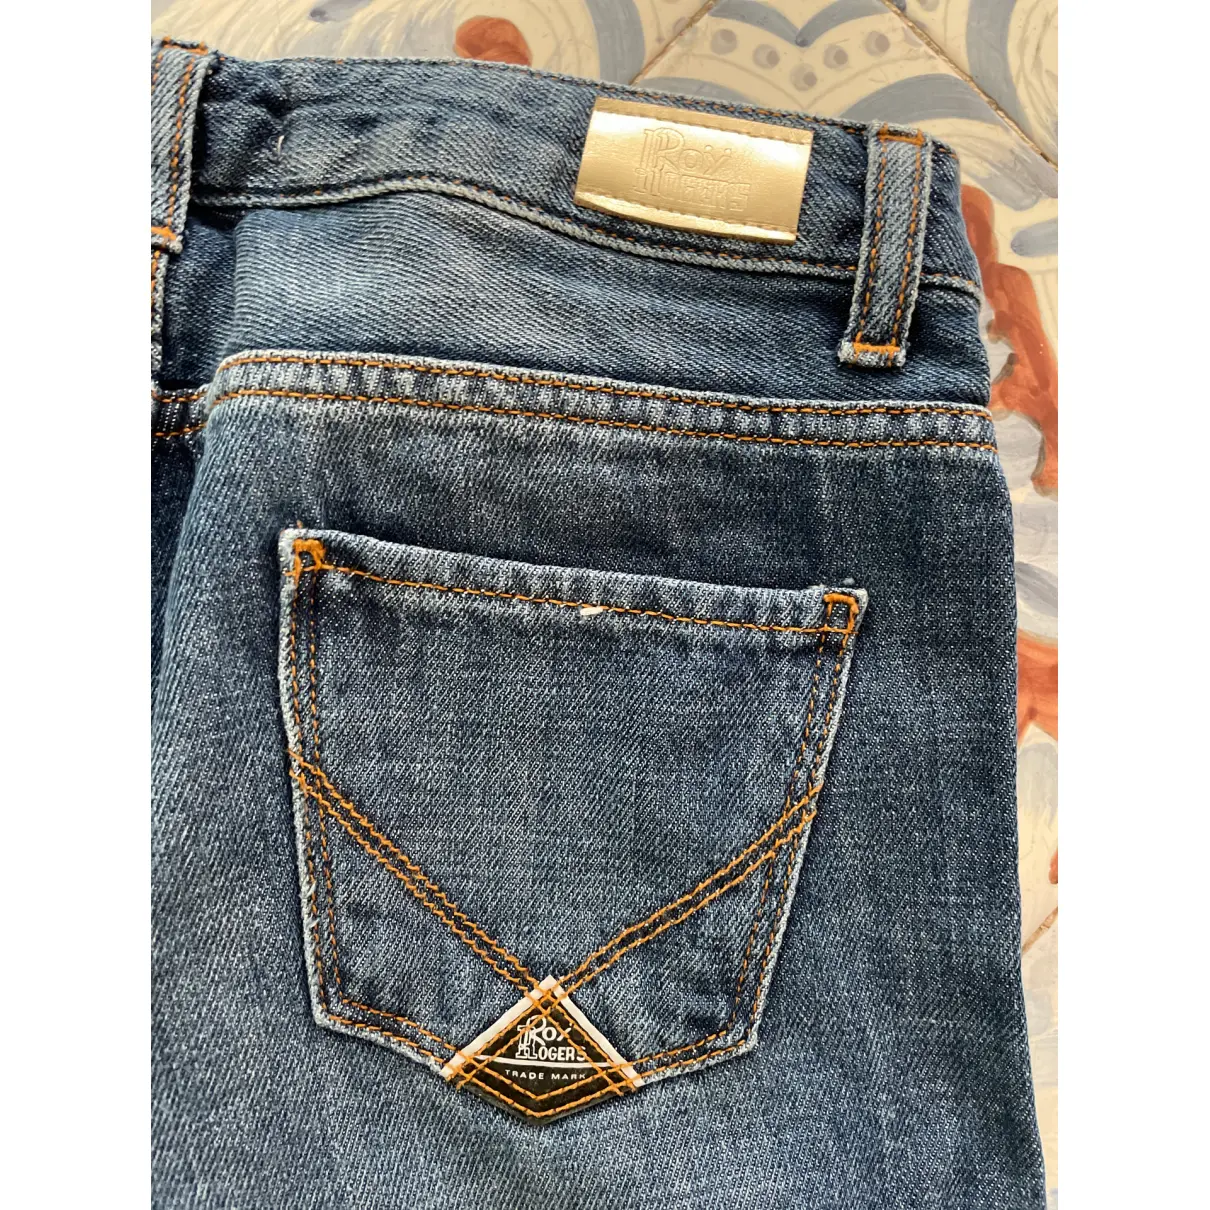 Jeans Roy Roger's